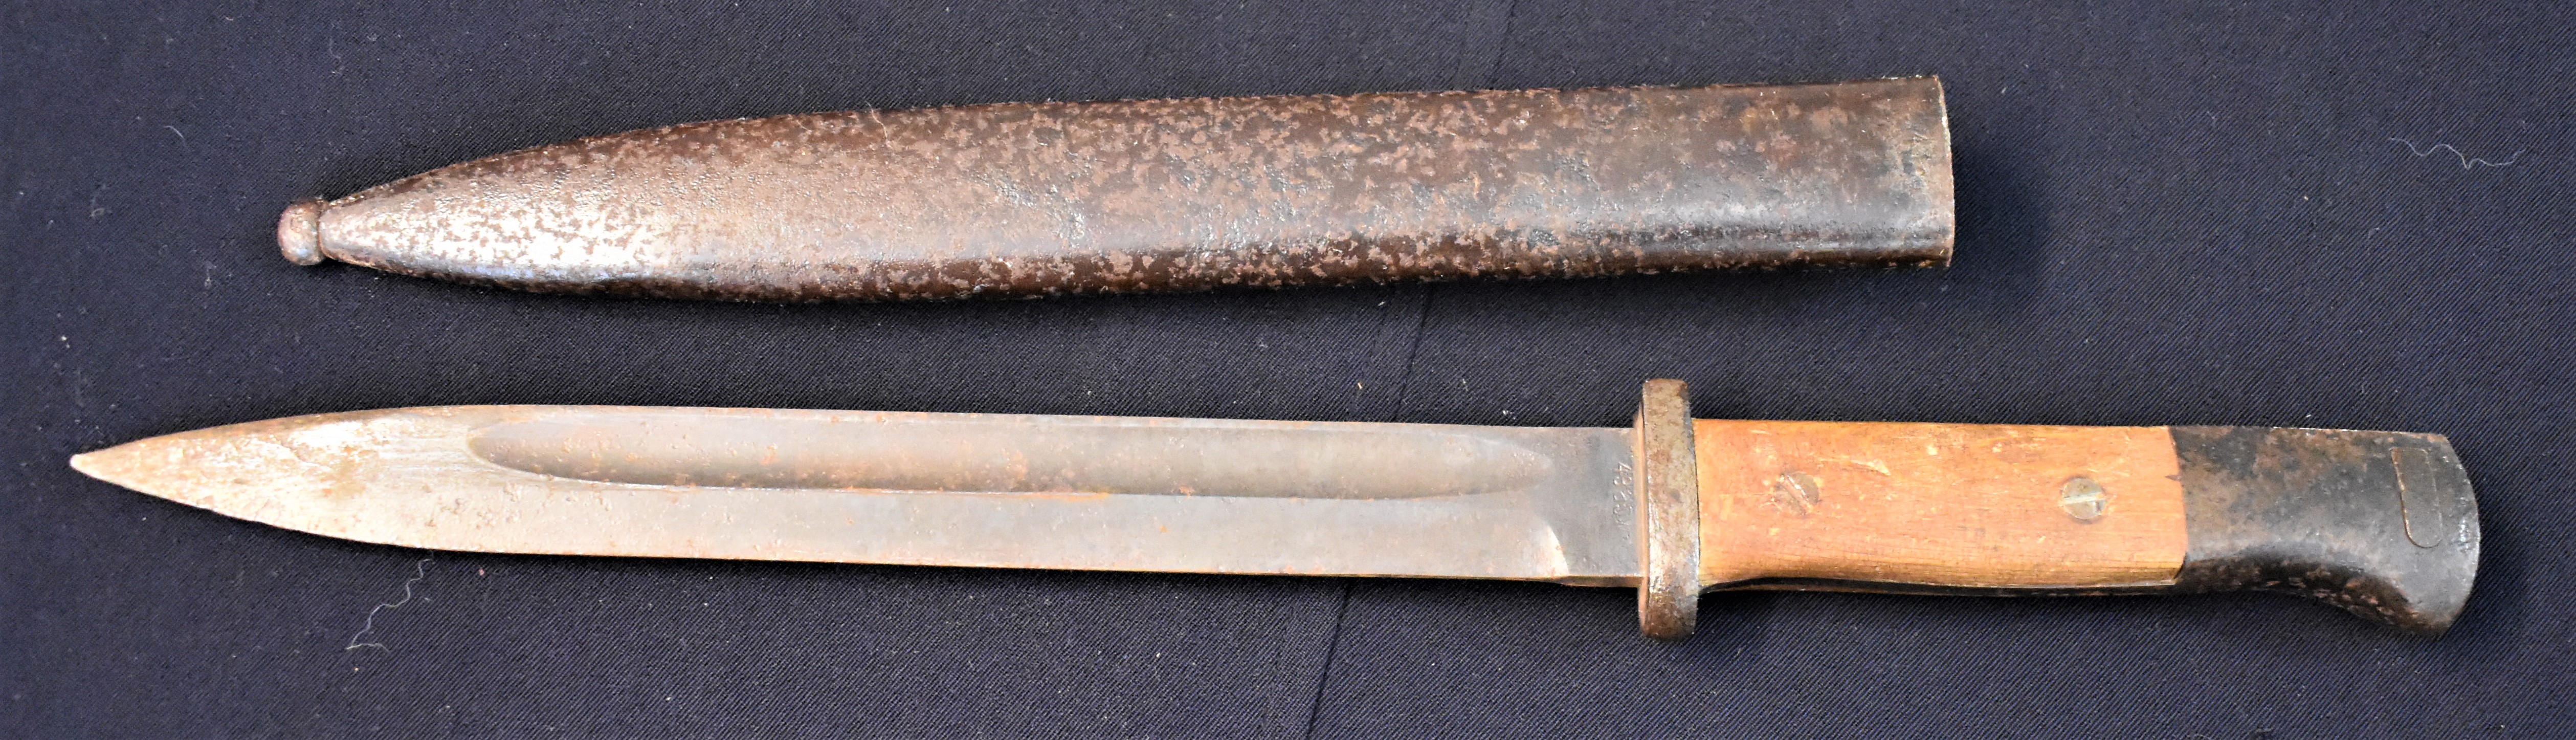 German WWII Mauser Bayonet with maker '162y' obverse of the ricasso and '43ASW' on the reverse, - Image 4 of 4